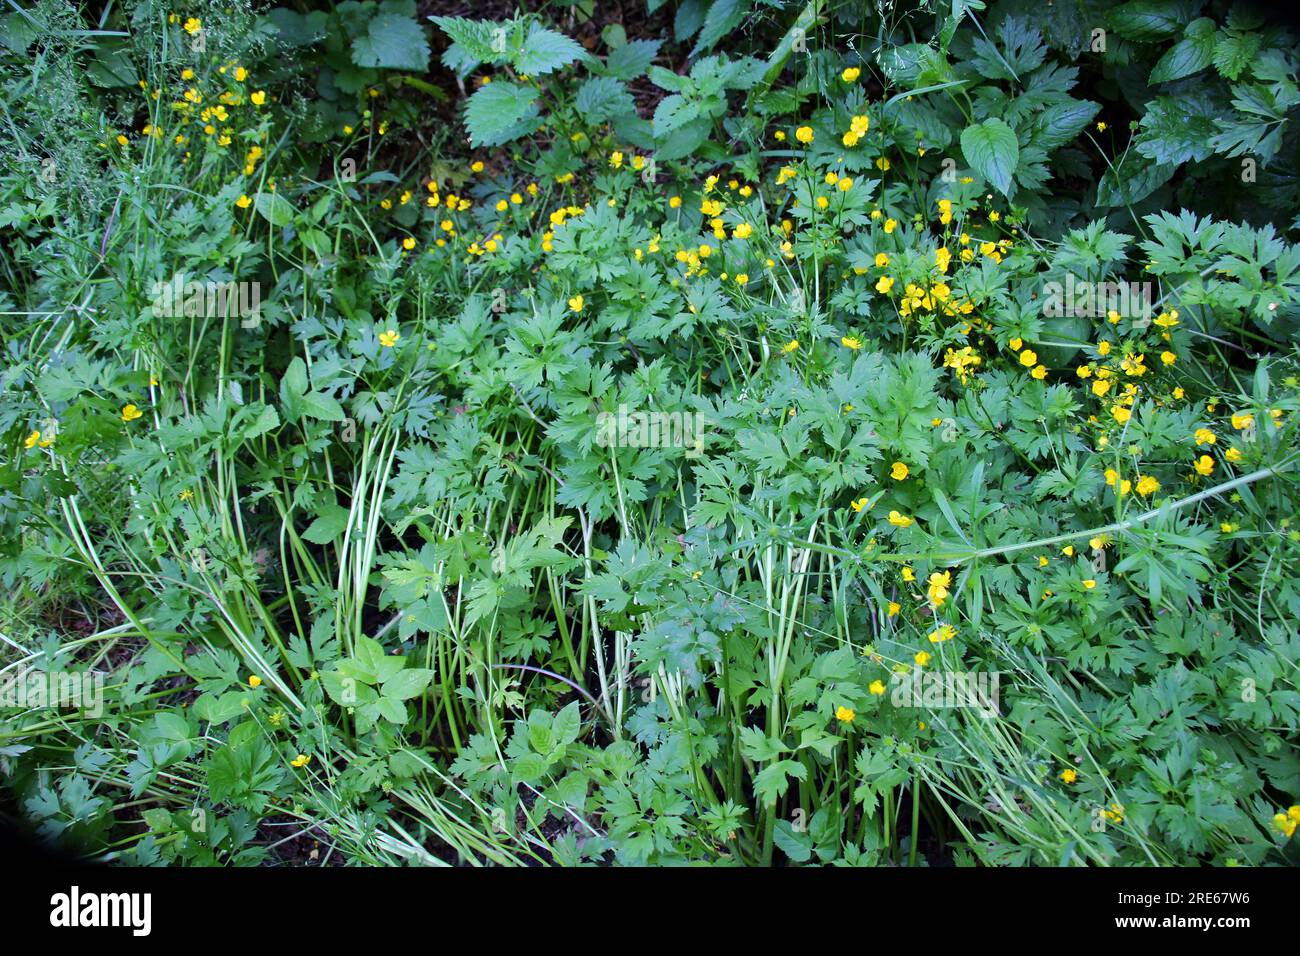 Creeping buttercup (Ranunculus repens) grows among grasses in the wild Stock Photo